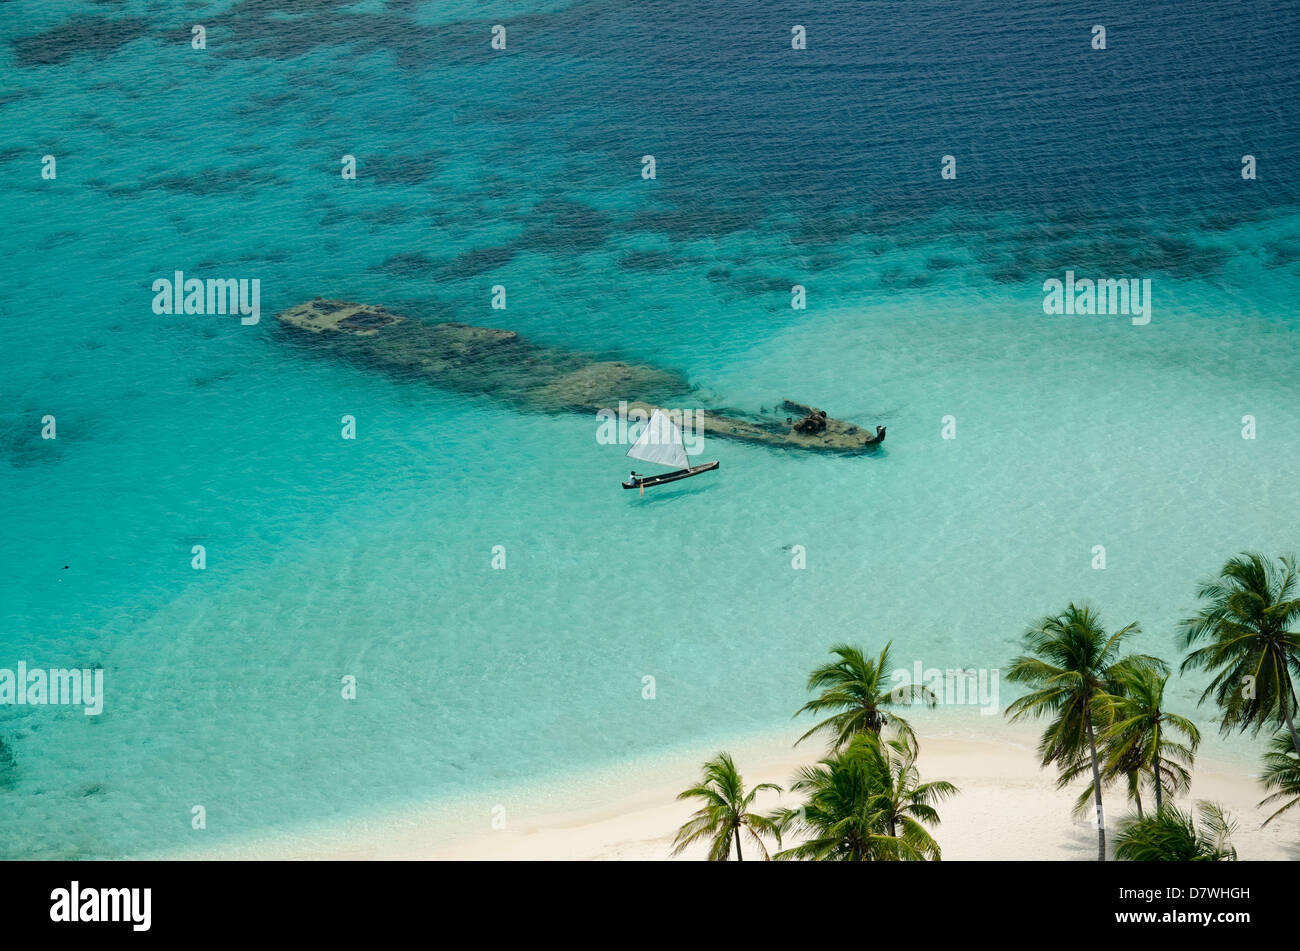 Aerial view of old wreck and palm tree in a tropical beach Stock Photo